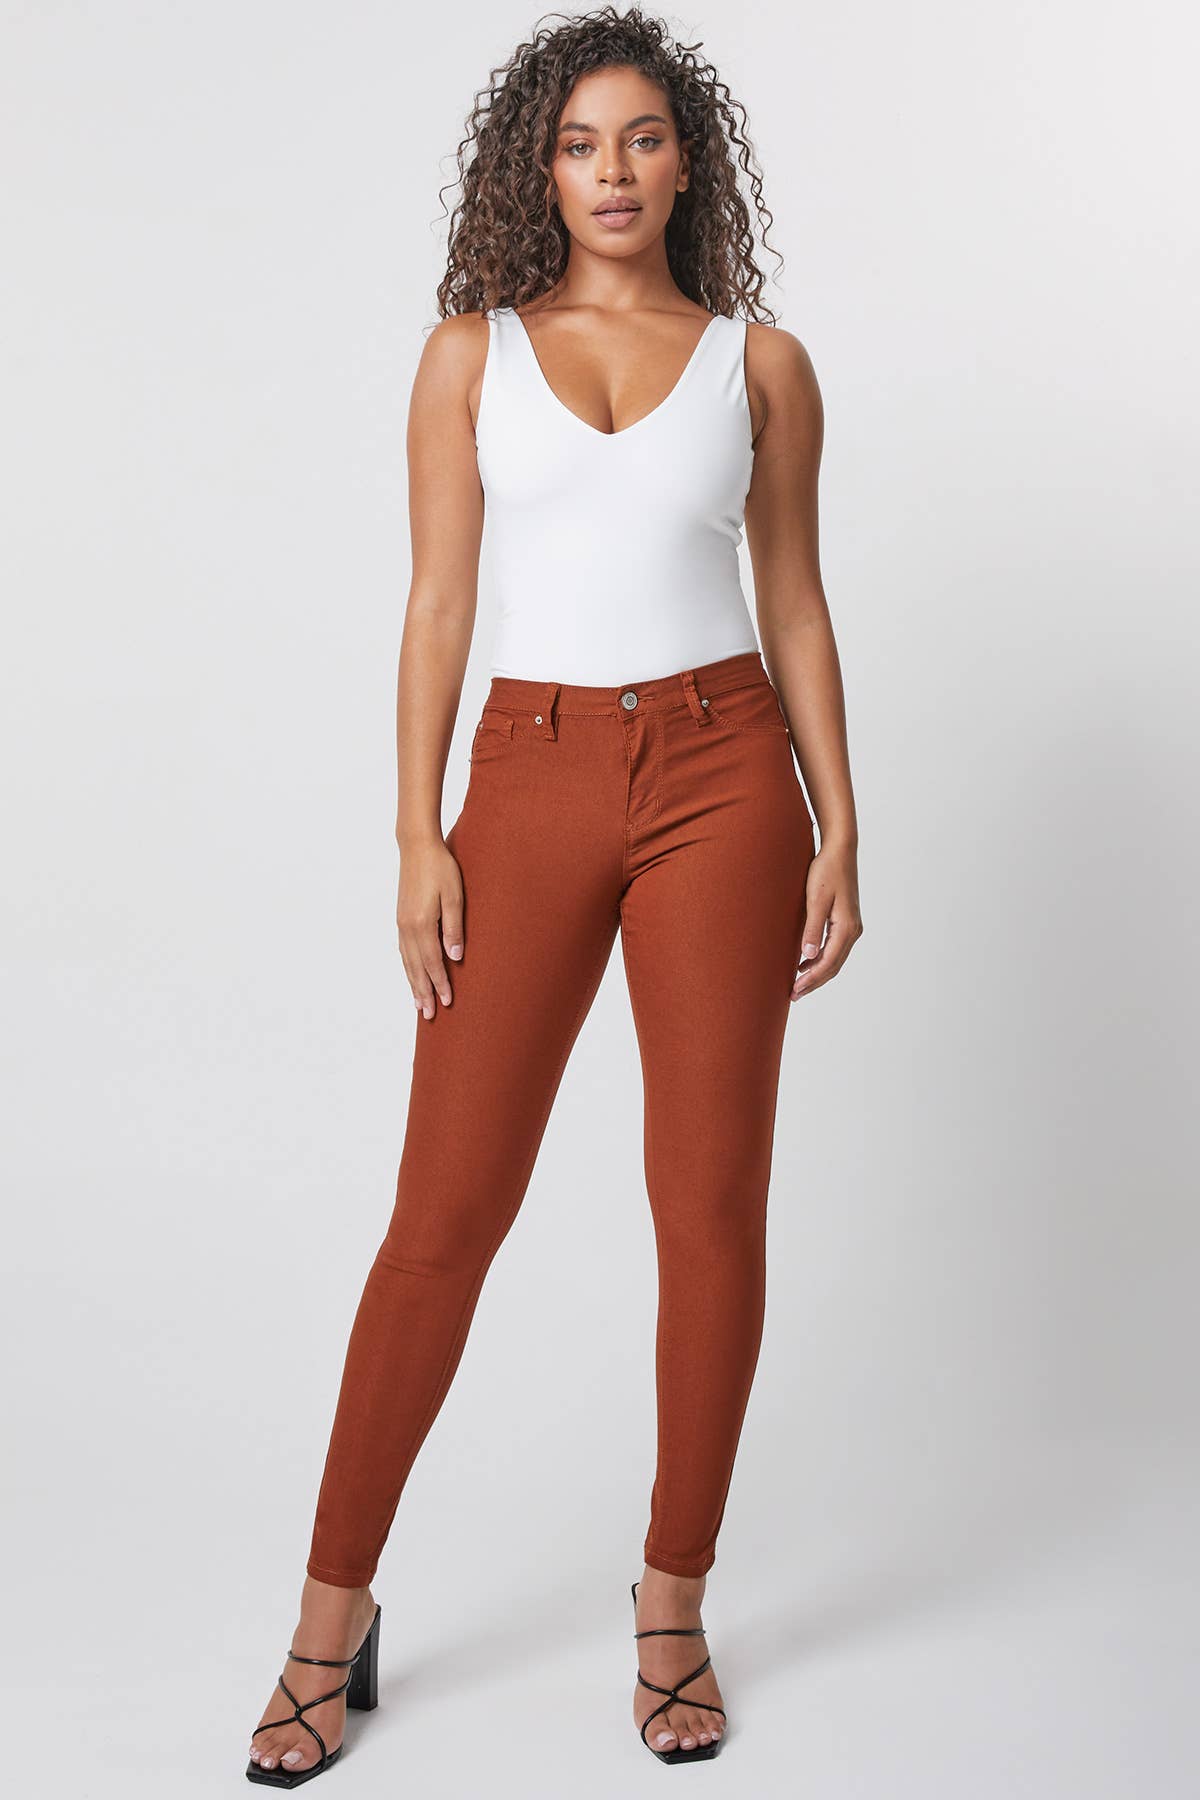 Junior Hyperstretch Mid-Rise Skinny Jean: ExtraLarge / BROSE